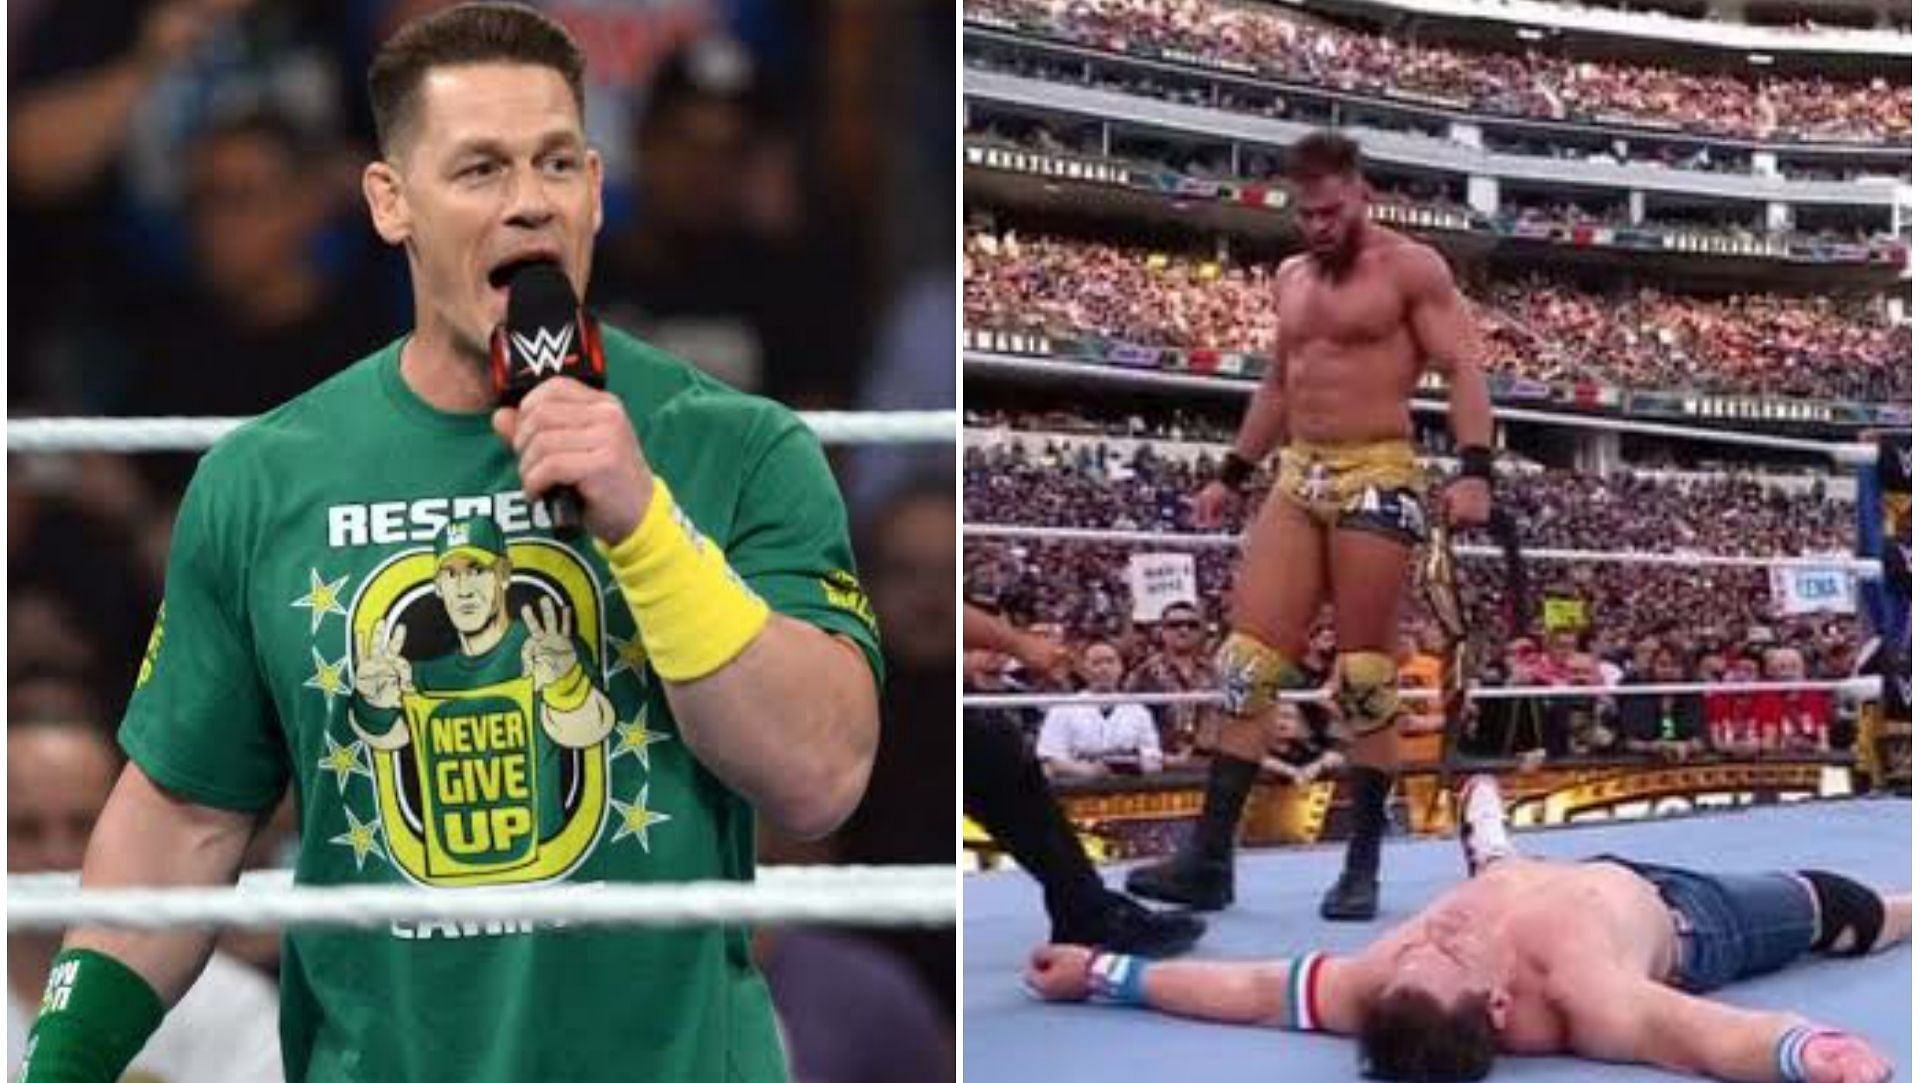 John Cena could face Austin Theory in a rematch following WrestleMania 39.